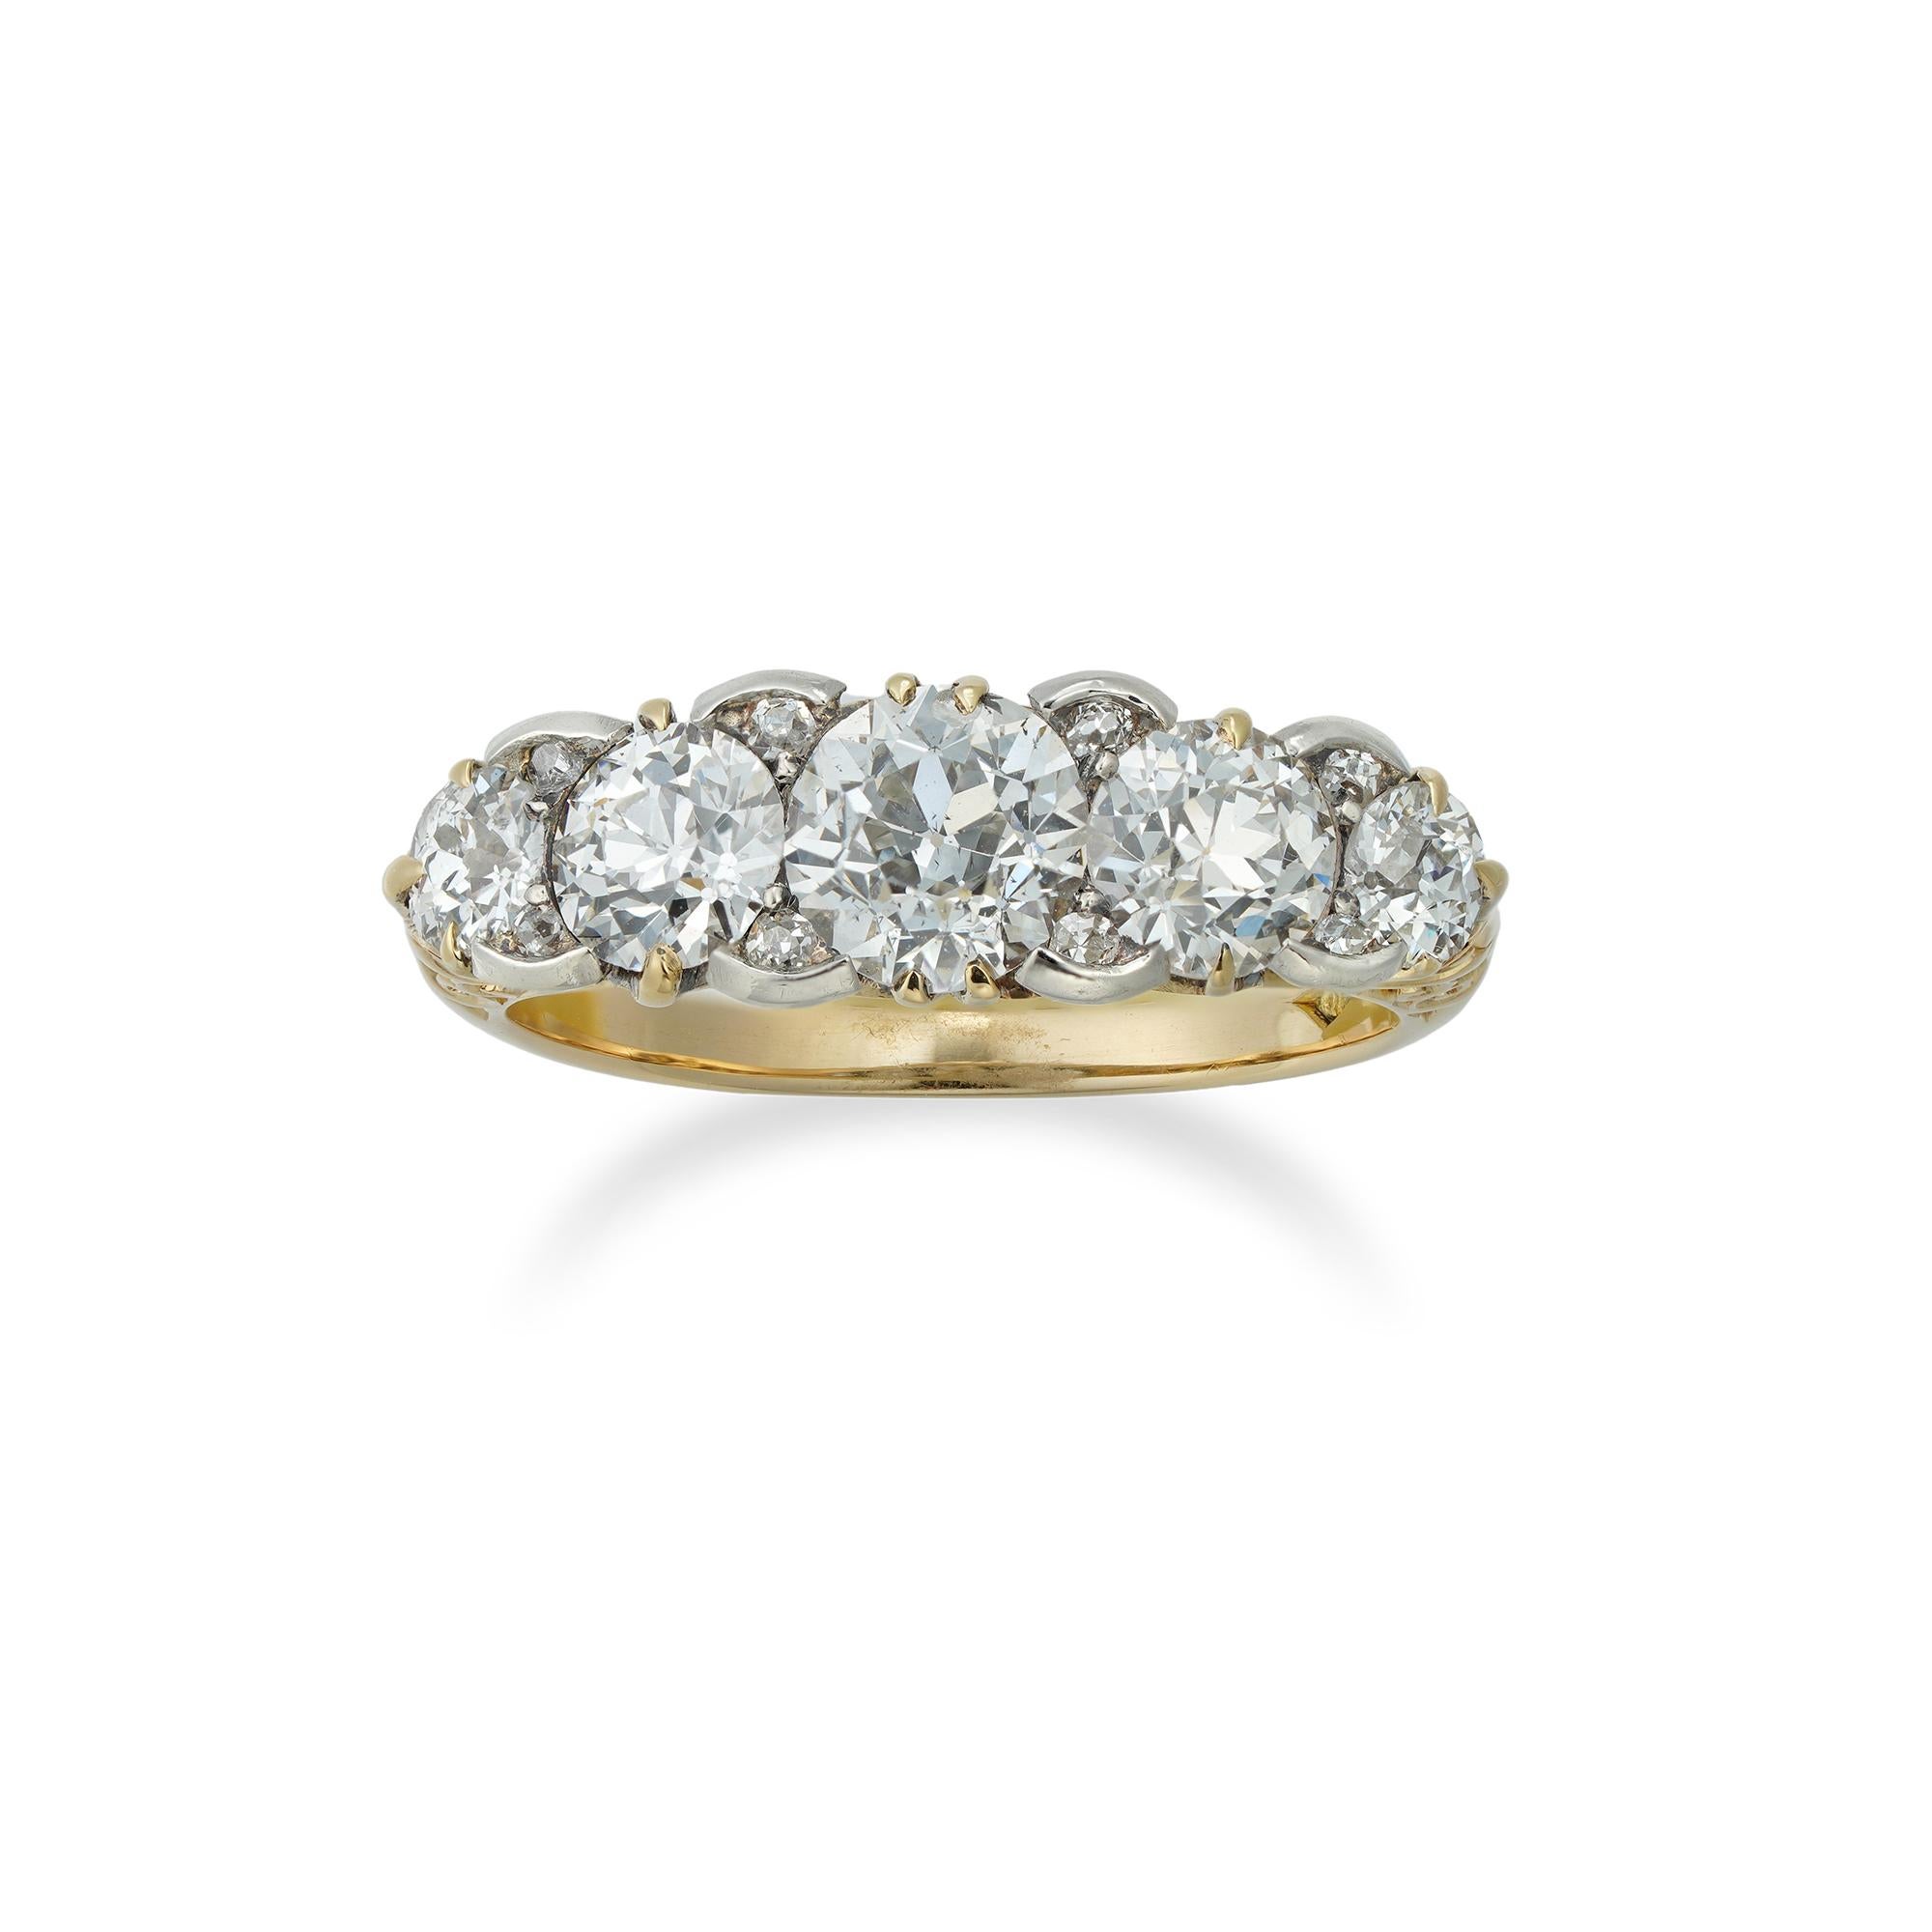 A late Victorian five stone diamond ring, the five old European-cut diamonds graduating from the centre and estimated to weigh 1.95 carats in total, embellished with rose-cut diamonds in-between, mounted in silver to a yellow gold mount with scroll